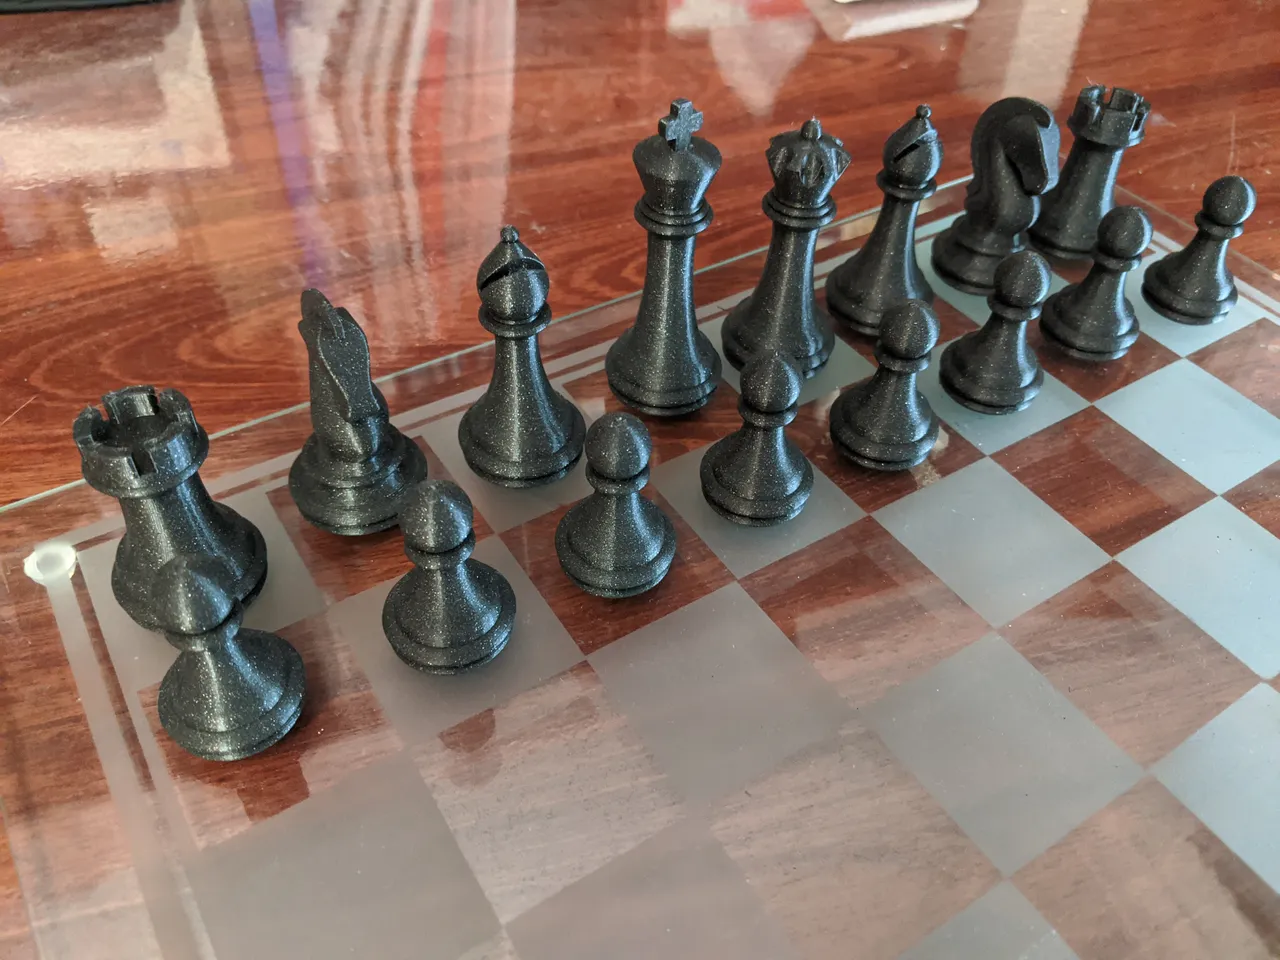 Chess, Board Game